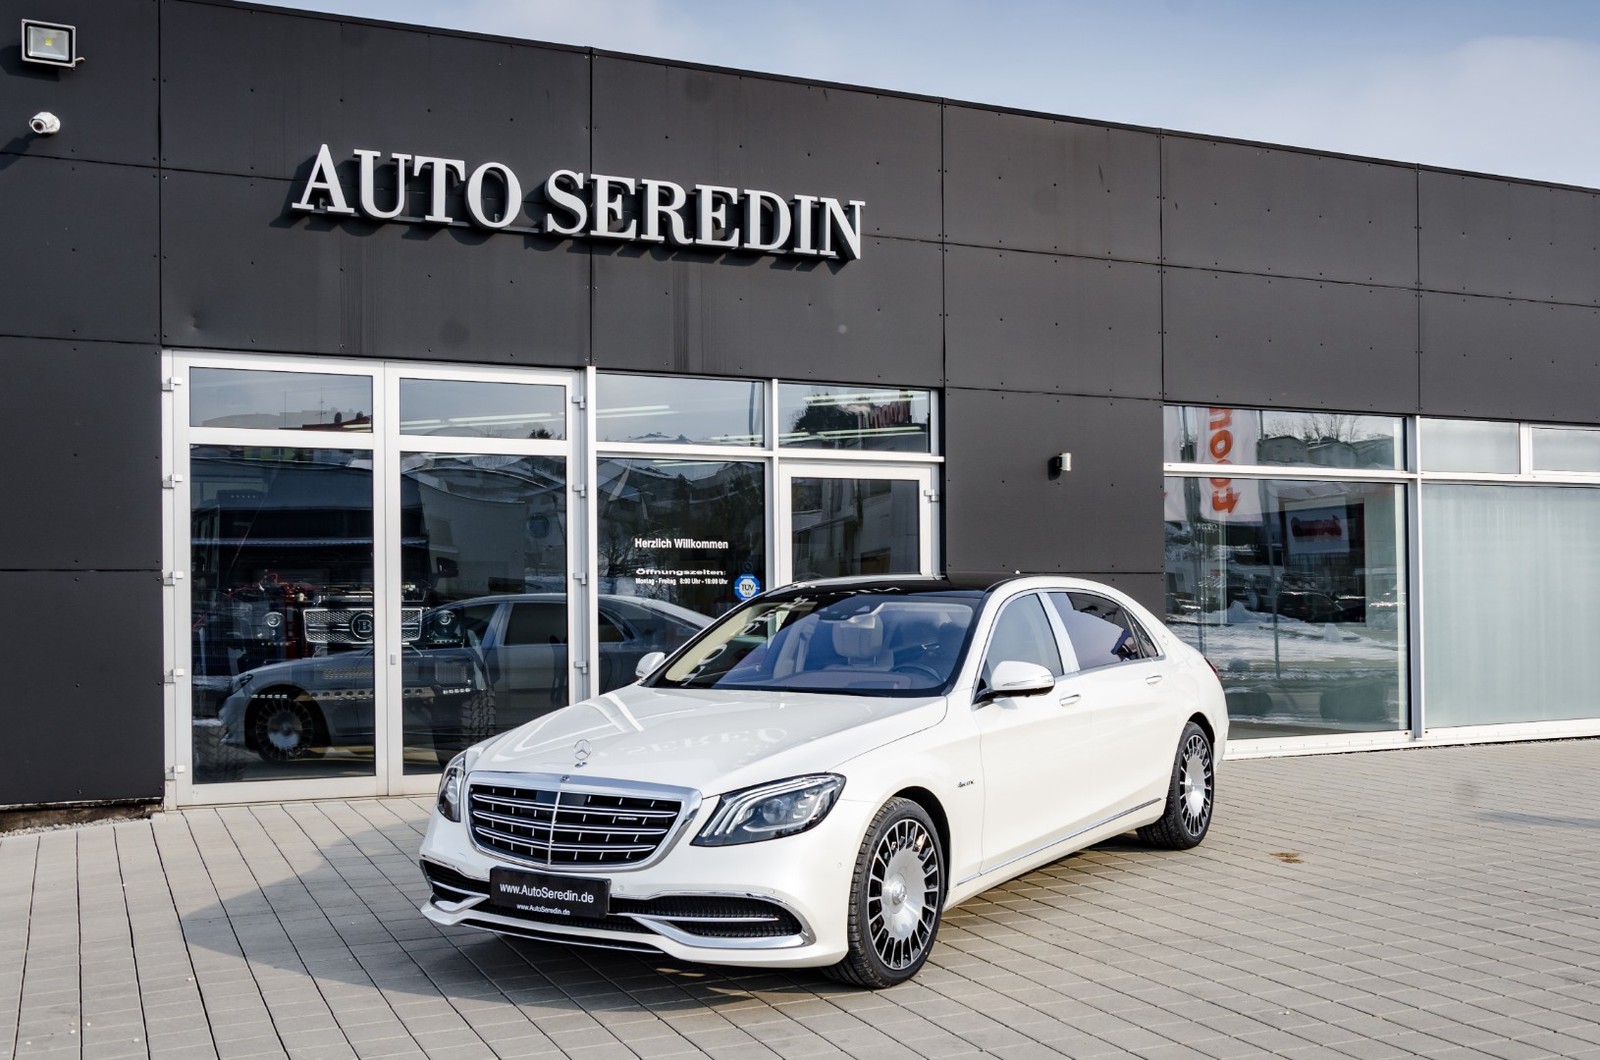 Mercedes Benz S 560 Maybach 4m Used Buy In Hechingen Bei Stuttgart Price 135648 Eur Int Nr 2572 Sold